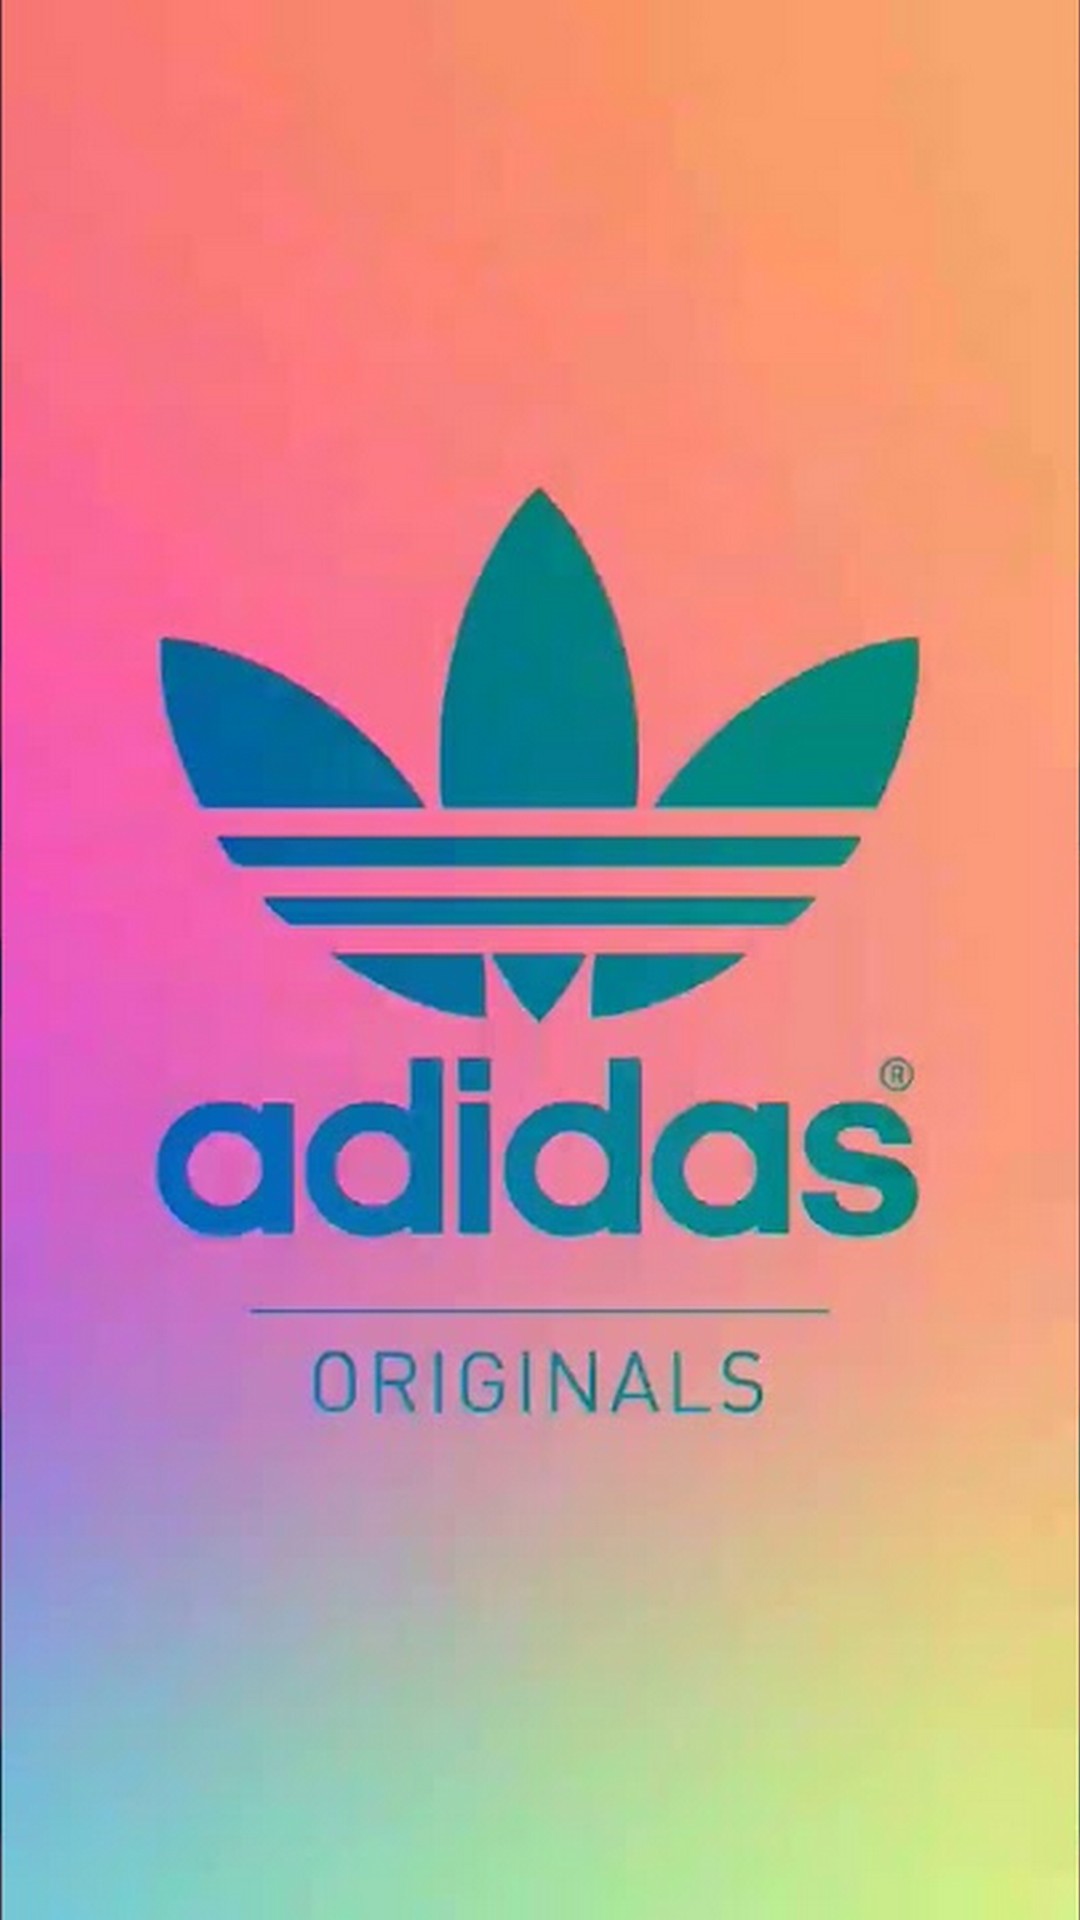 iPhone X Wallpaper Adidas with high-resolution 1080x1920 pixel. You can use this wallpaper for your Windows and Mac OS computers as well as your Android and iPhone smartphones